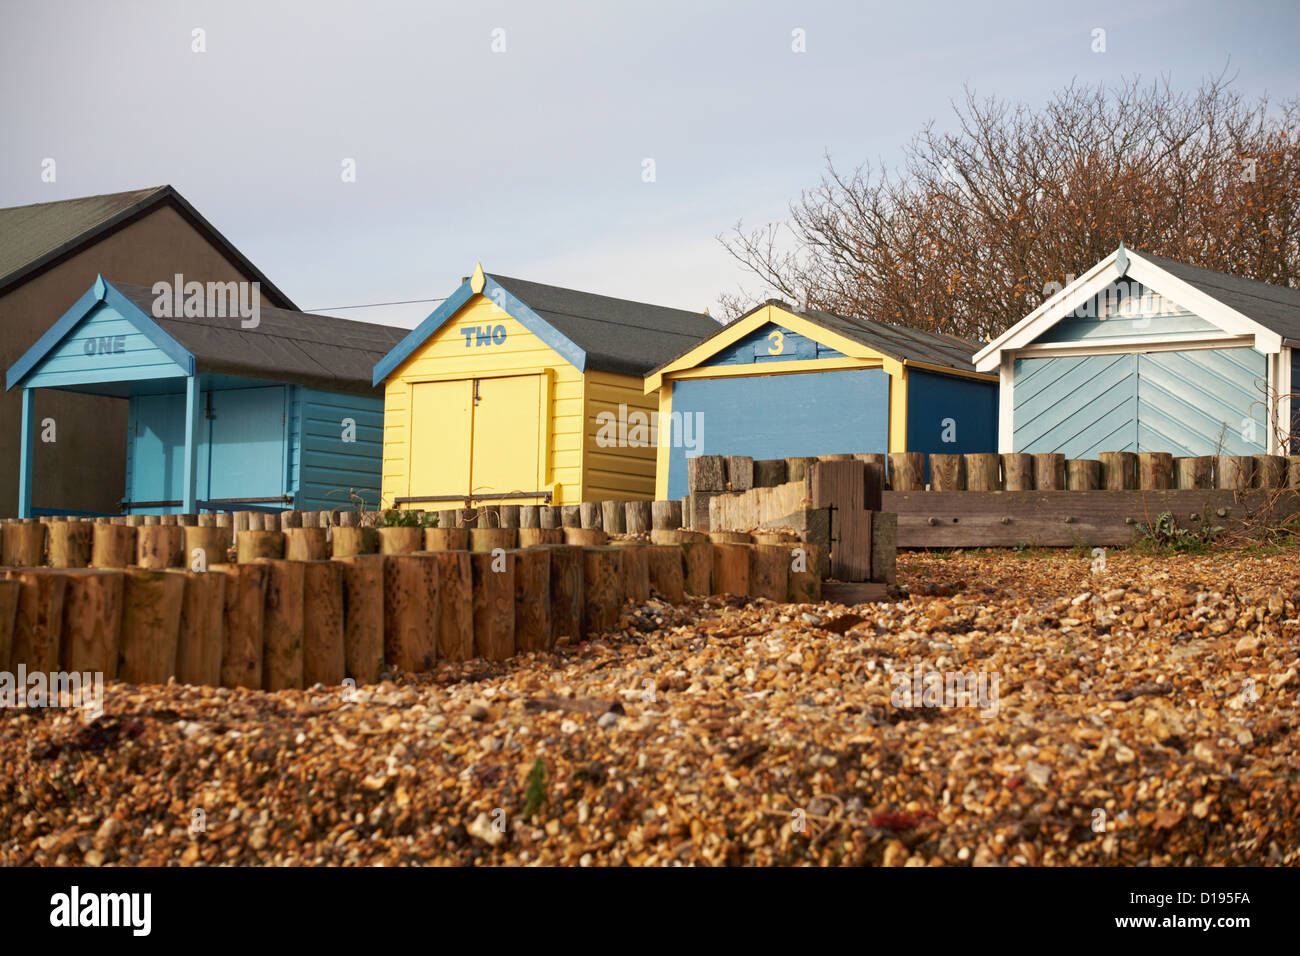 One, Two, 3, Four beach huts at Calshot, Hampshire in November Stock Photo